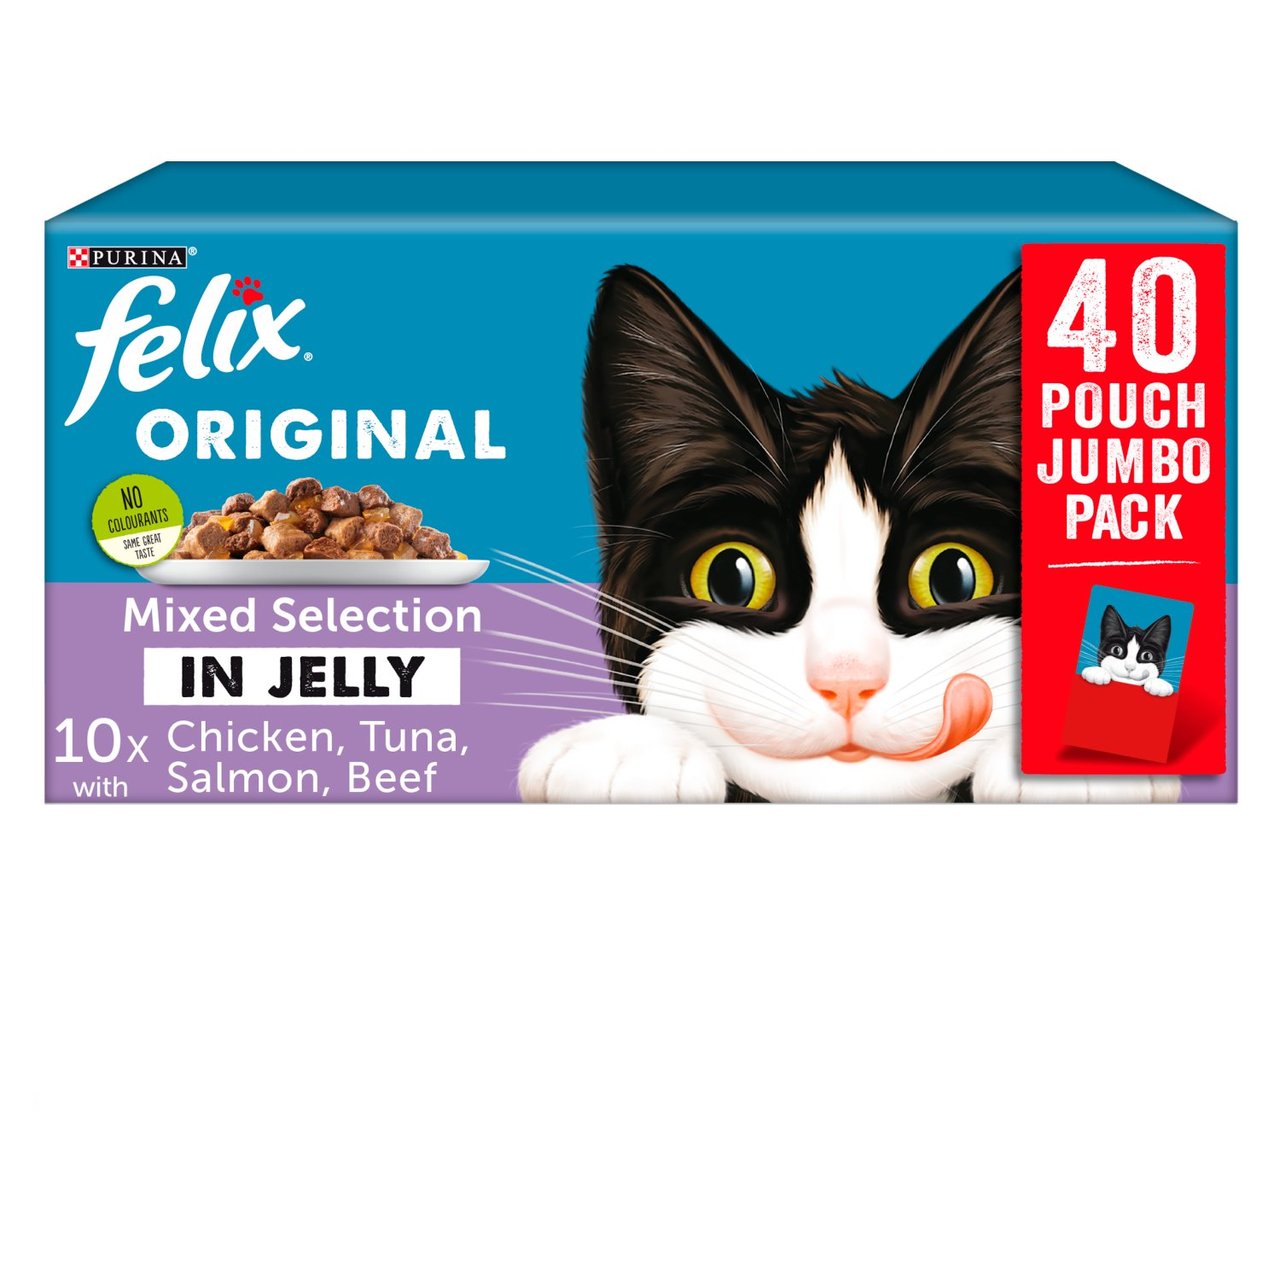 An image of Felix Mixed Selection in Jelly